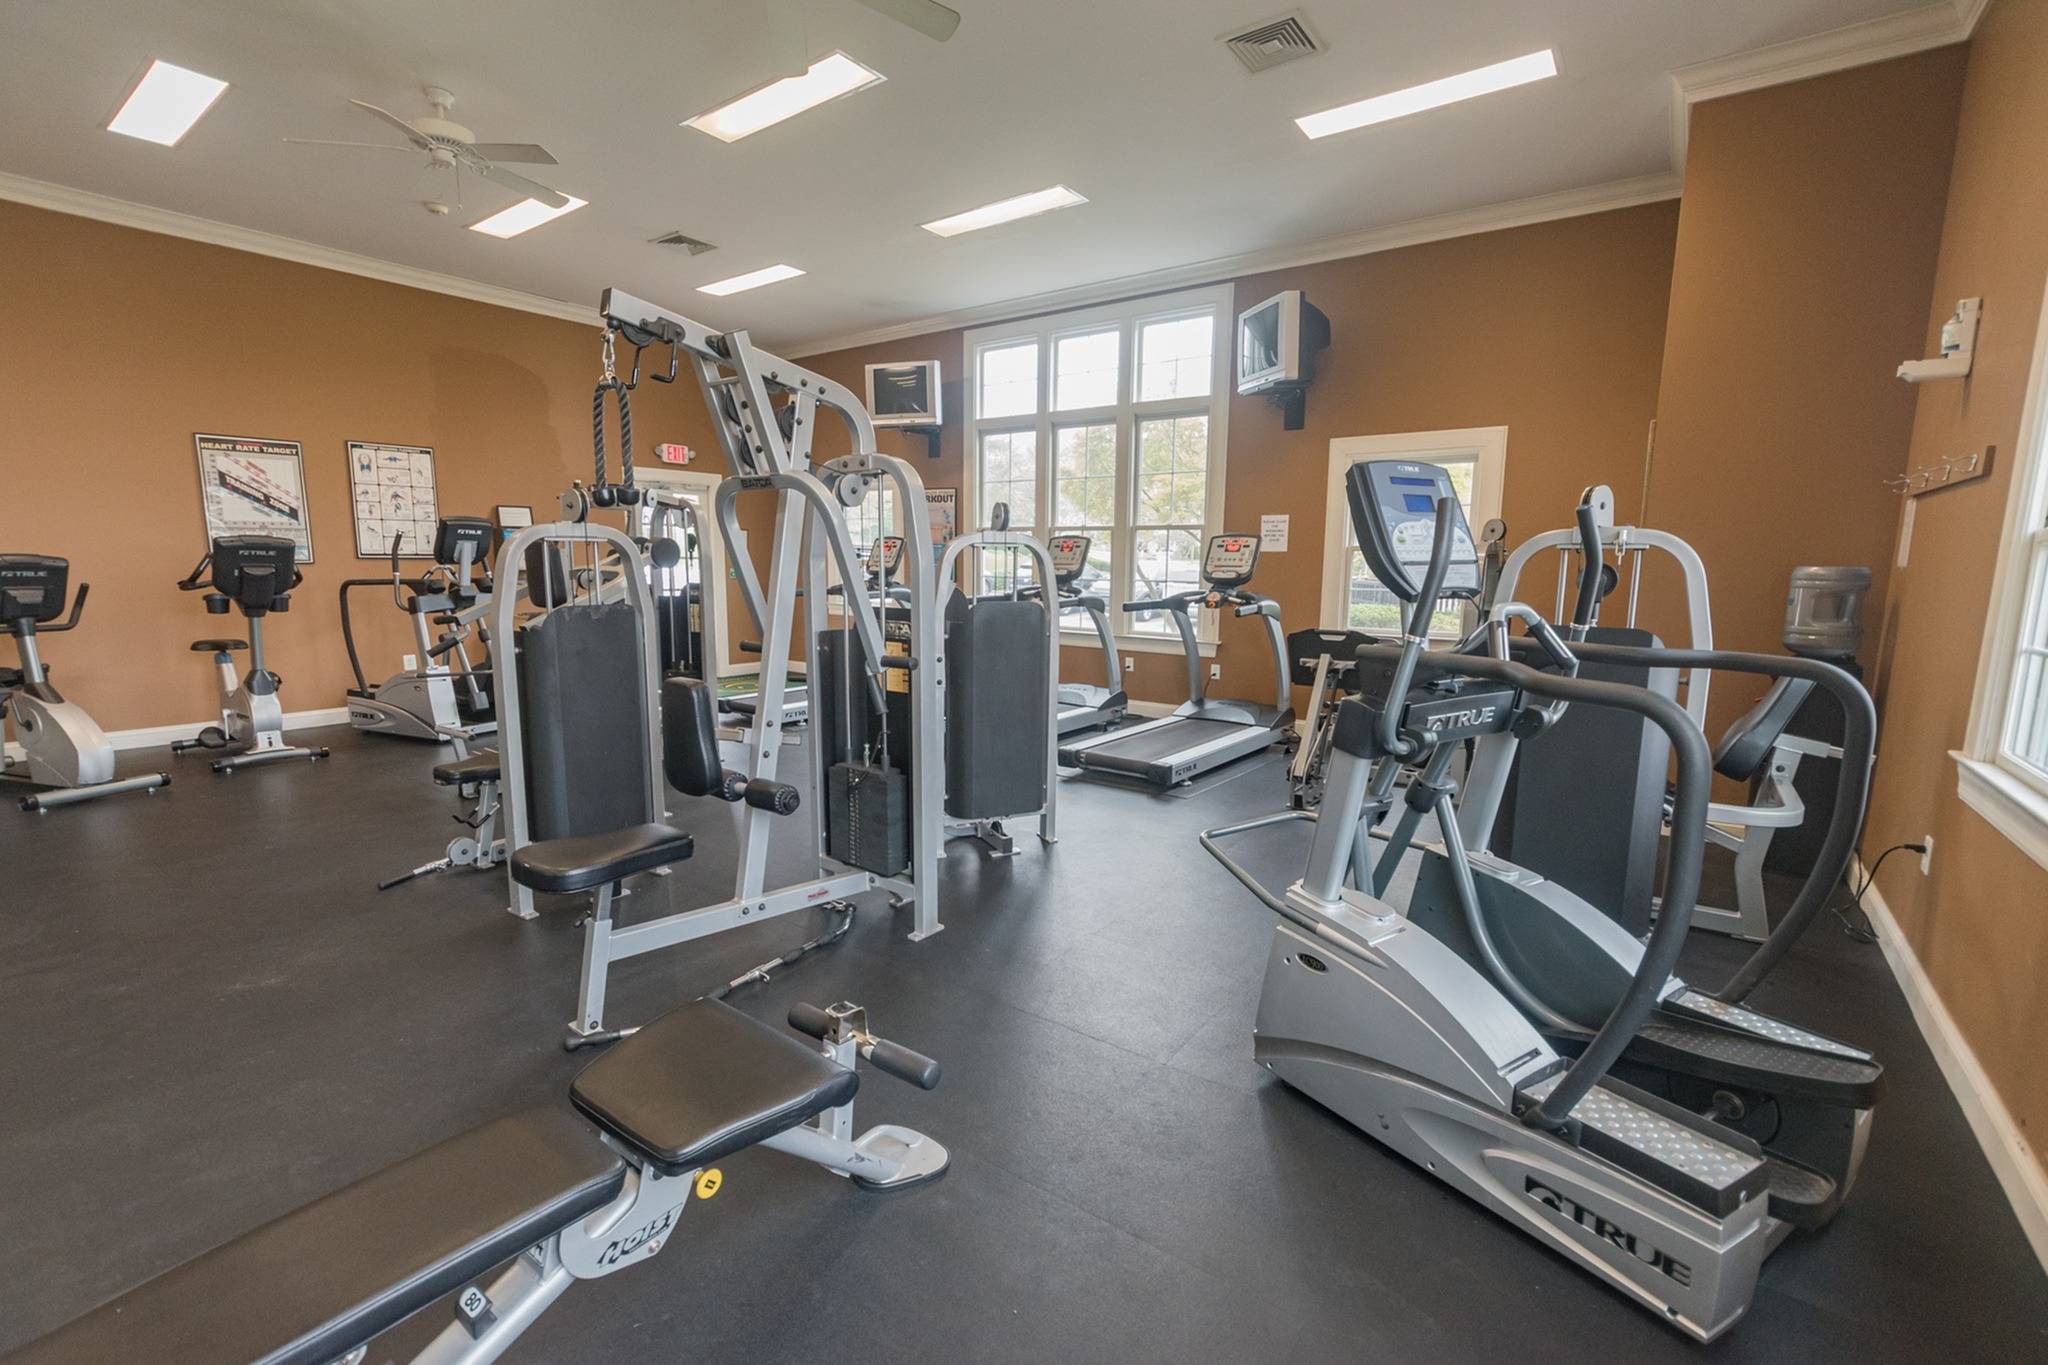 A wide variety of workout equipment in an indoor gym.